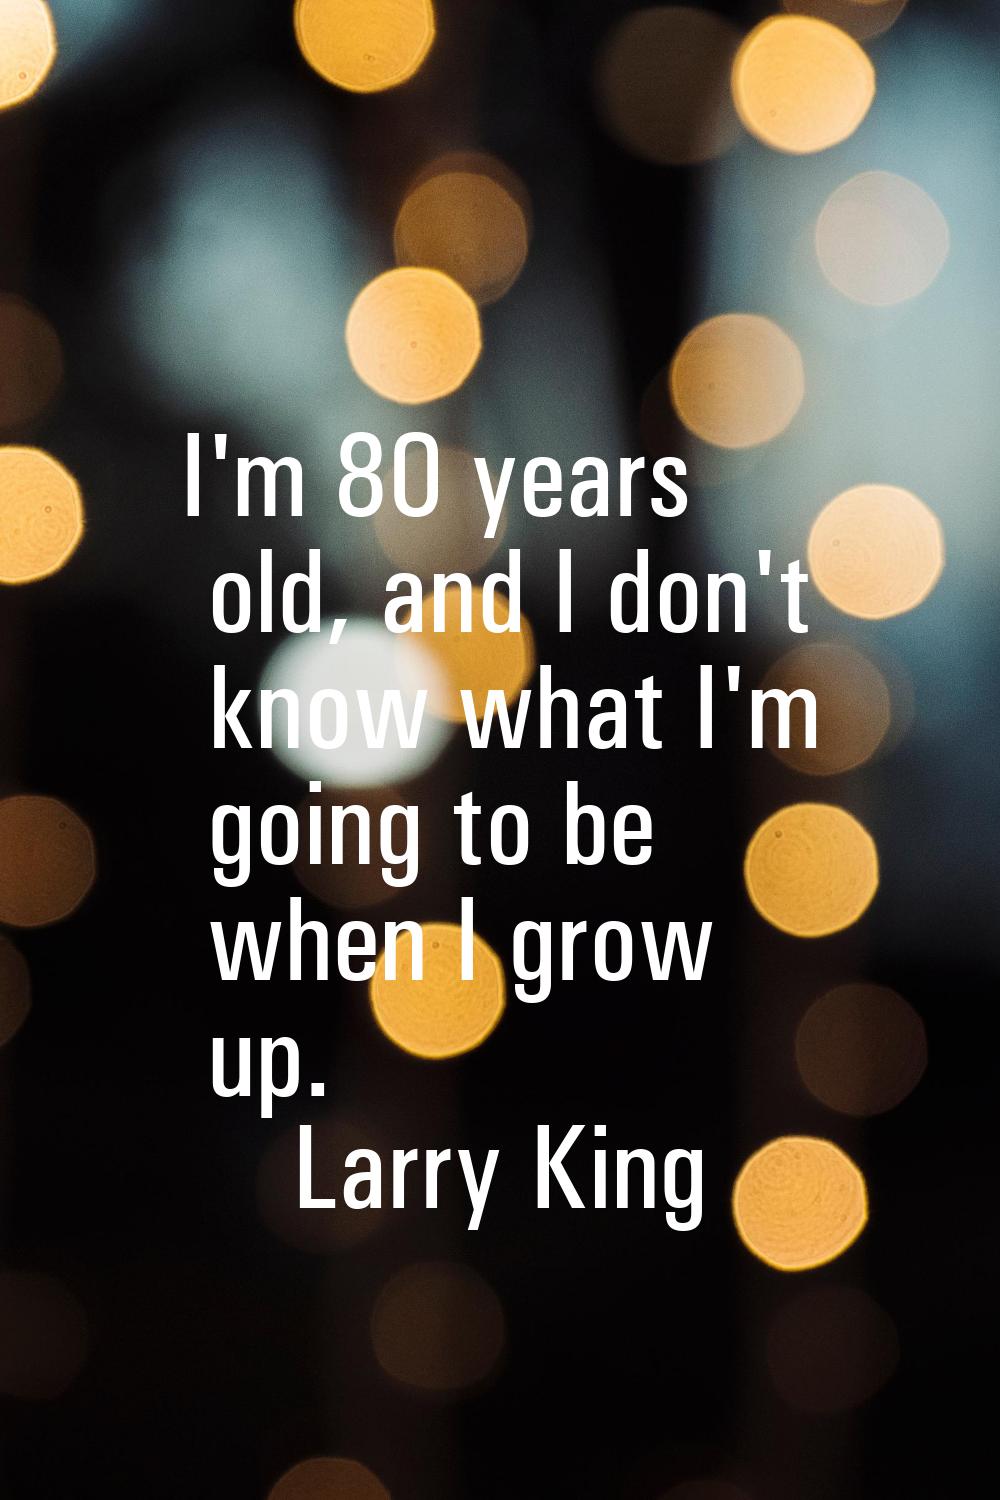 I'm 80 years old, and I don't know what I'm going to be when I grow up.